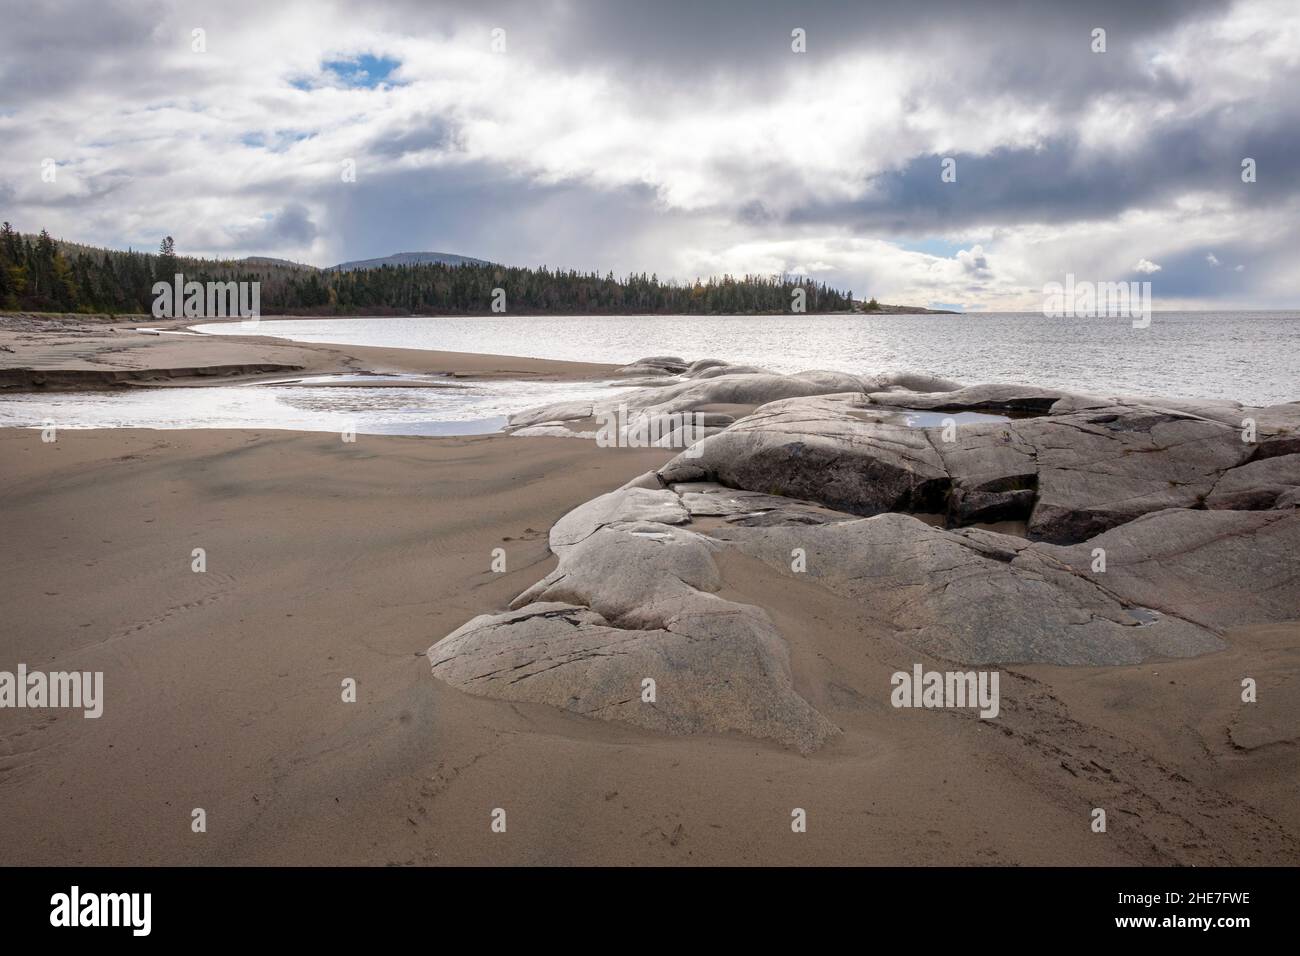 Beach at Neys Provincial Park on the shore of Lake Superior in Northwestern Ontario, Canada featuring granite sculpted by glaciers. Stock Photo